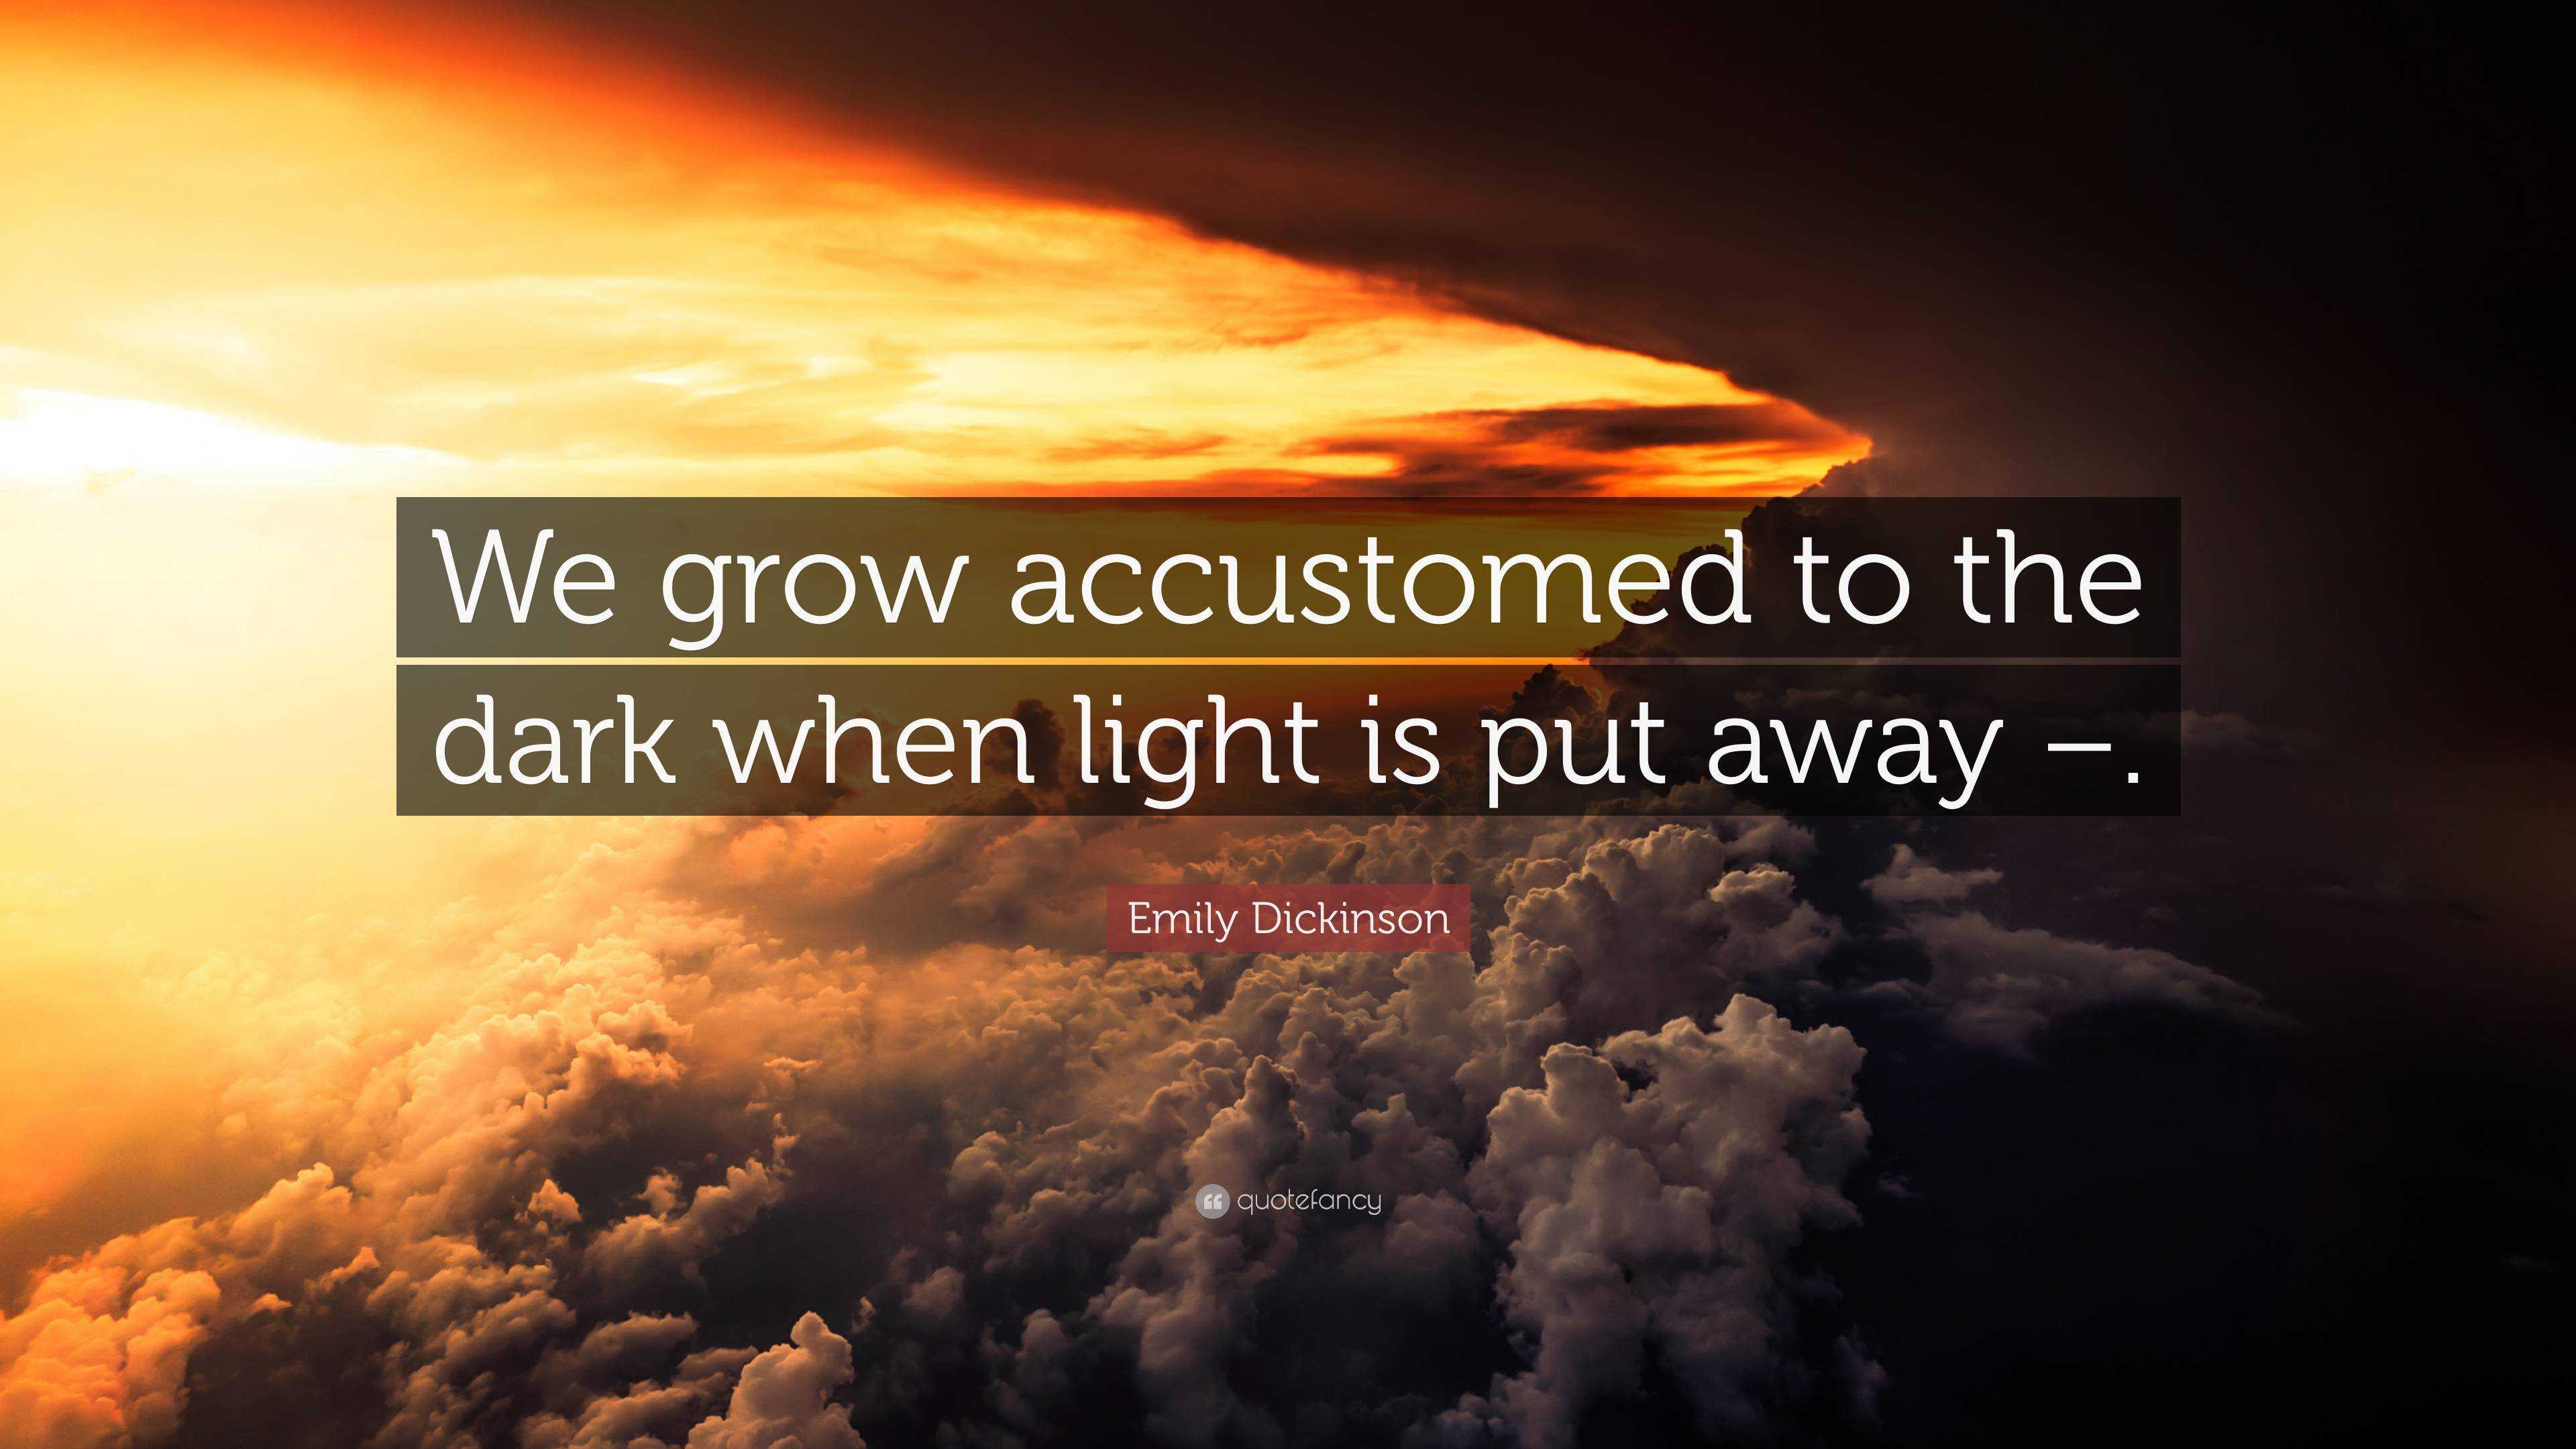 emily dickinson we grow accustomed to the dark